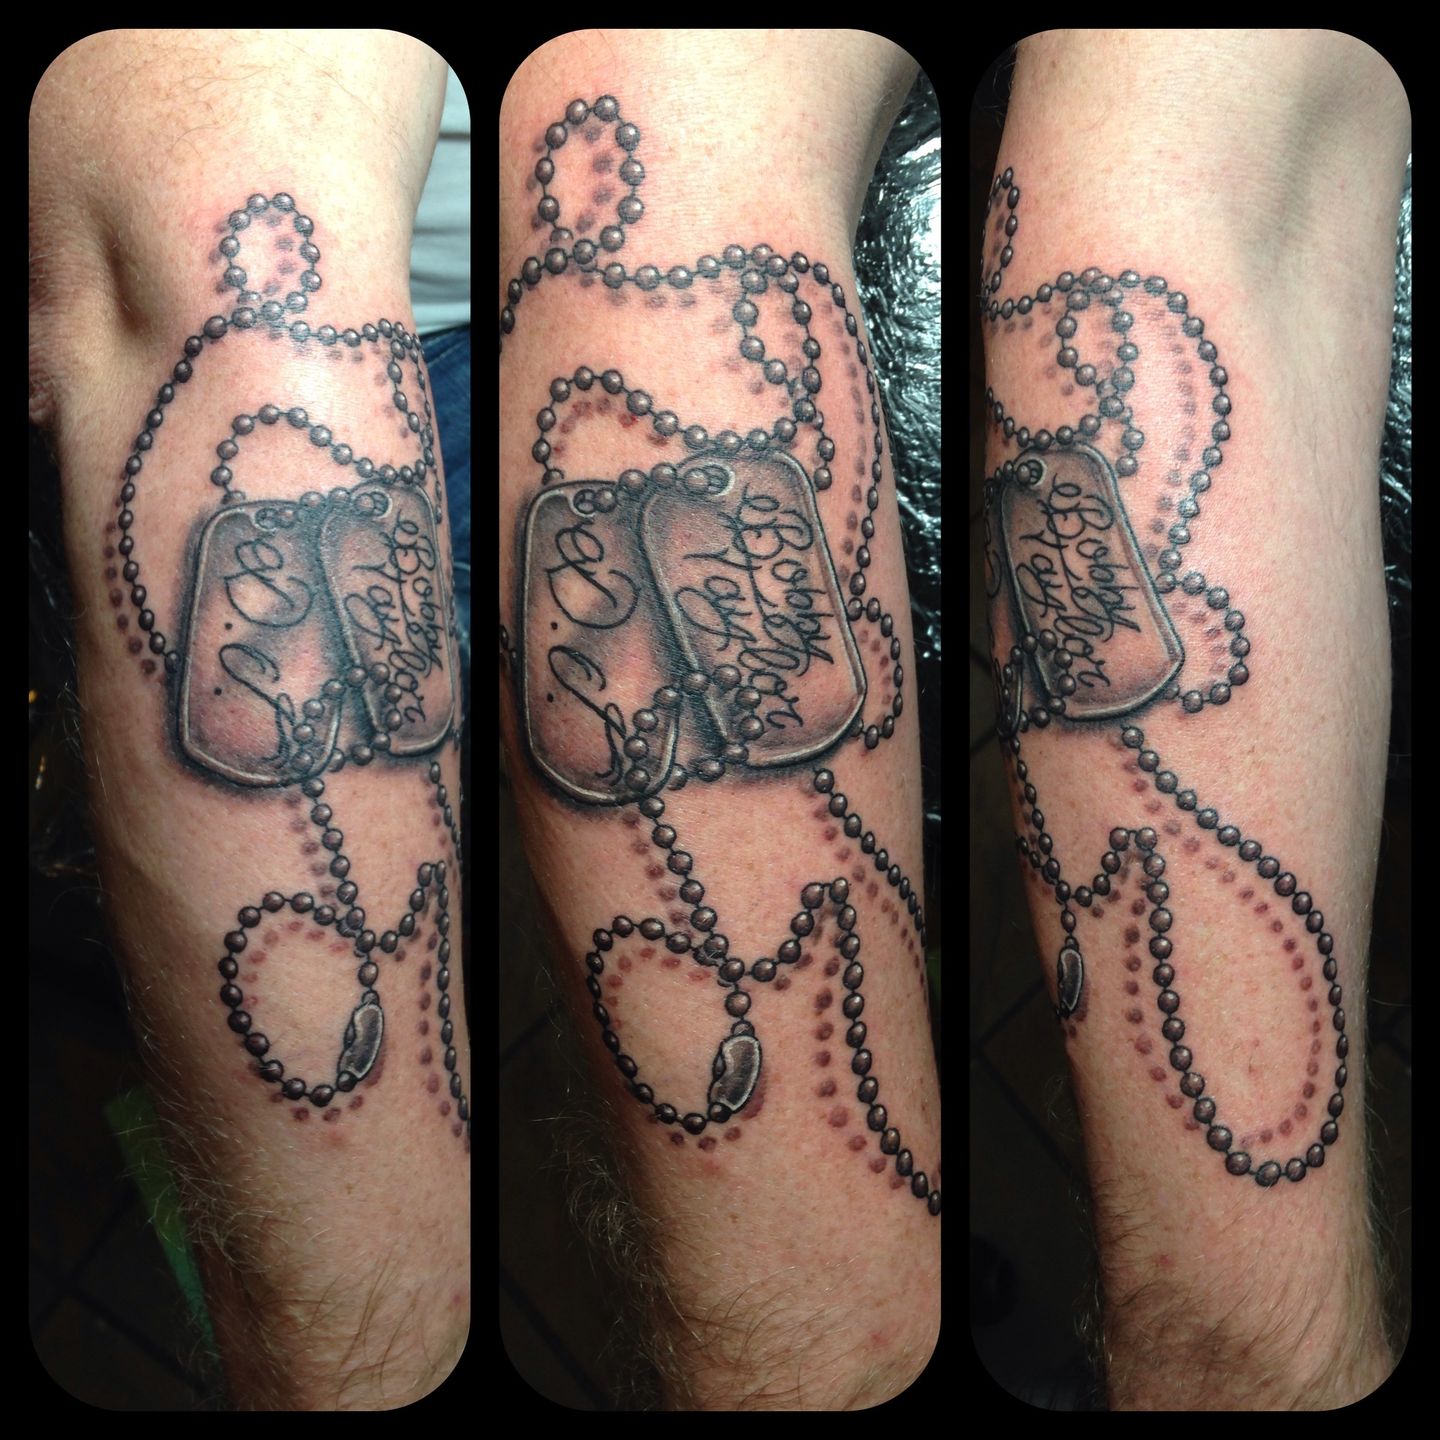 Share 59 brothers in arms tattoo best  thtantai2